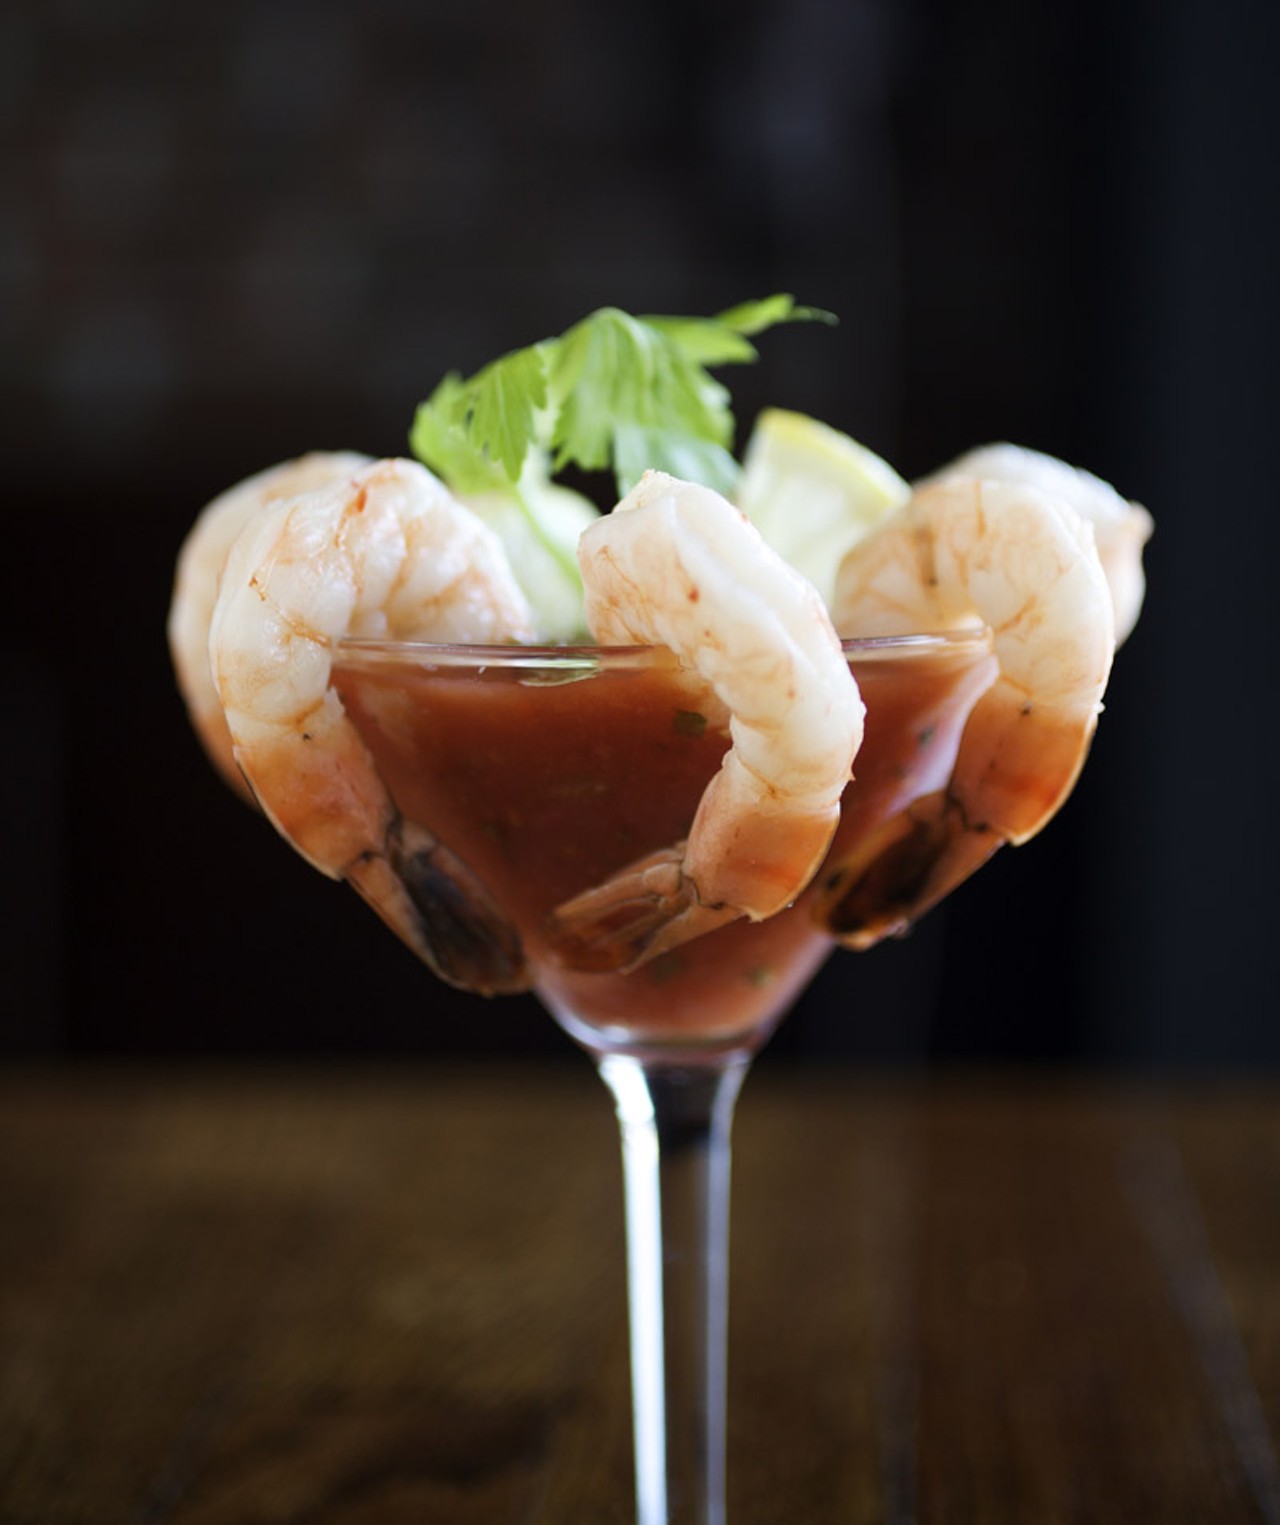 Gazpacho Shrimp Cocktail is also available on both the regular and late night menus.